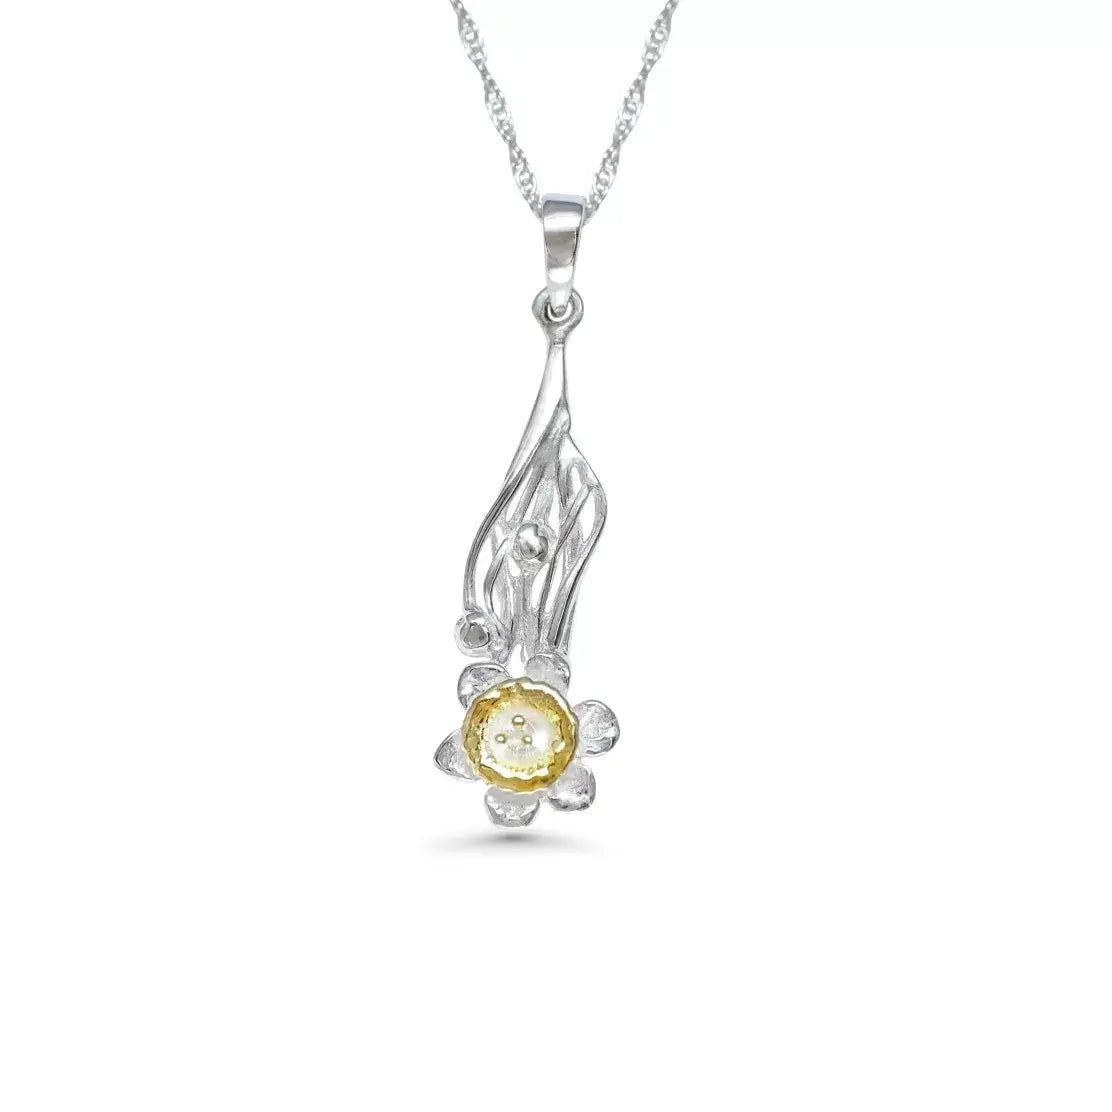 Daffodil Flower Pendant in Sterling Silver With 18 Carat Gold - Twelve Silver Trees